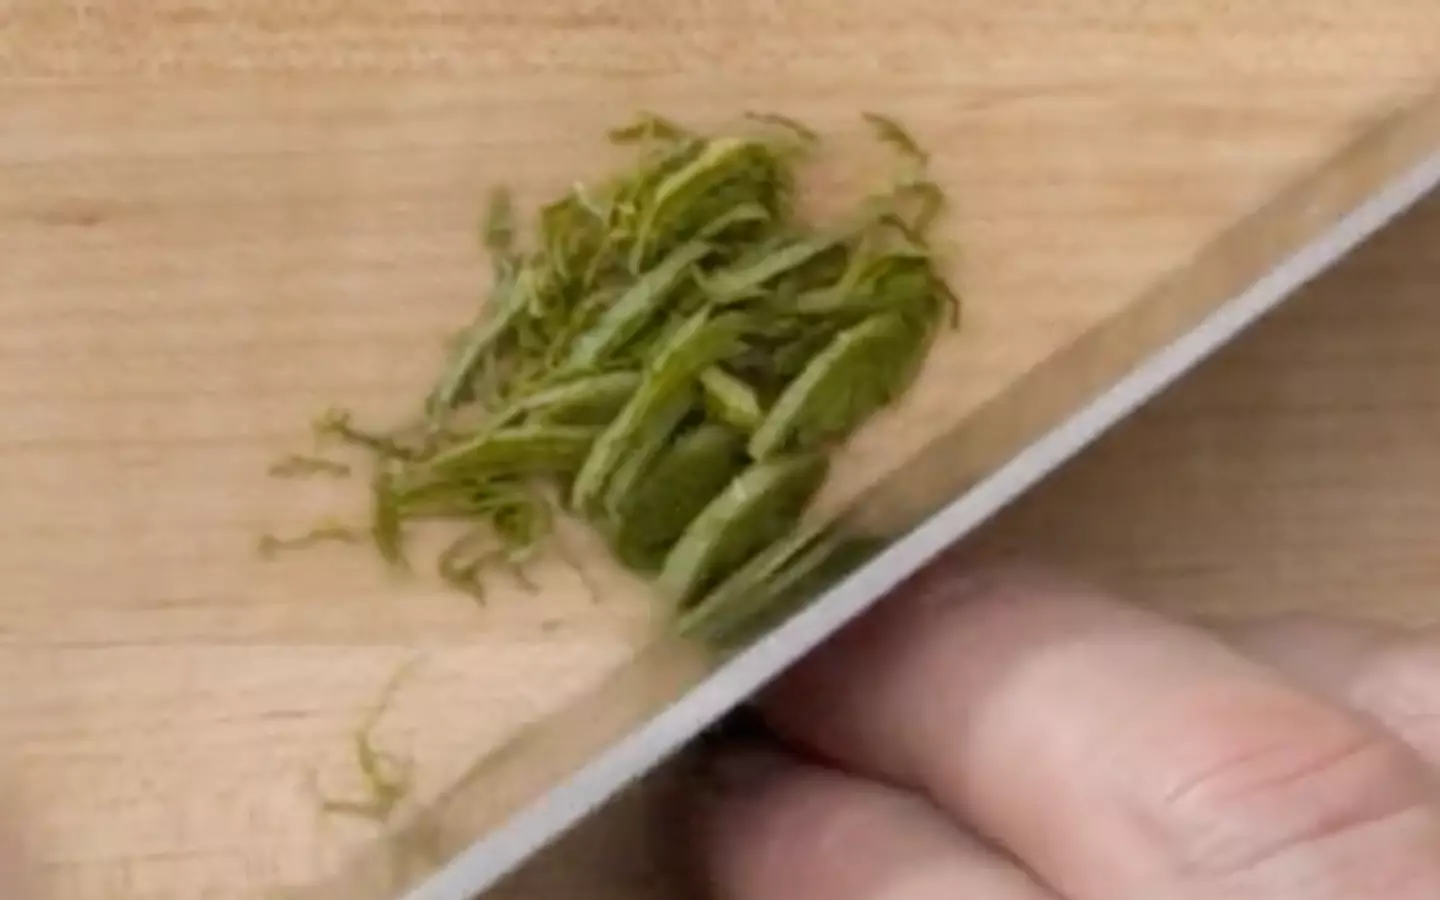 The technique creates 'fragrant shards' from the leaf.